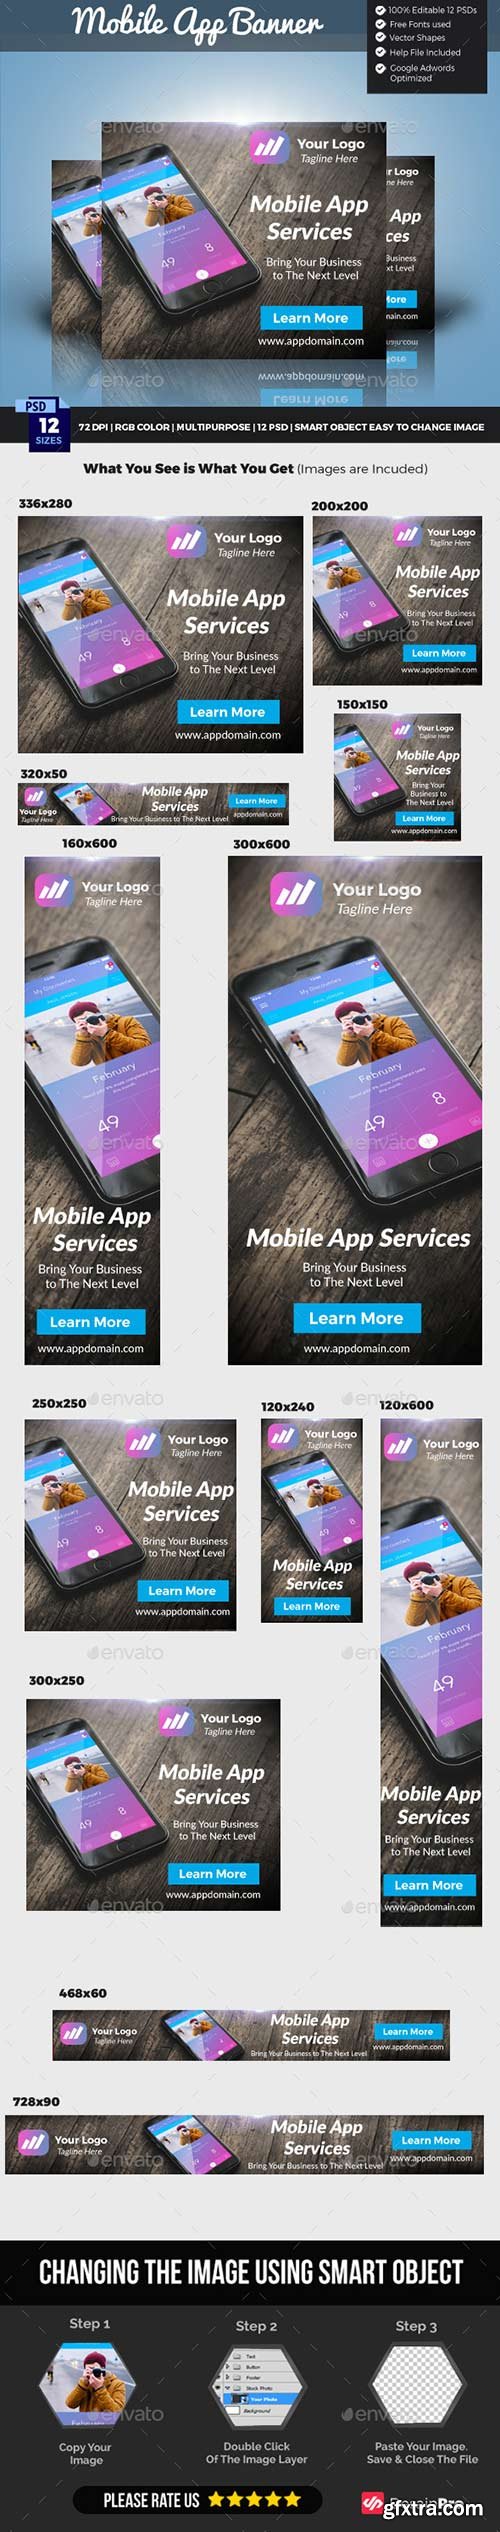 Graphicriver - Mobile Apps Banner 17728465